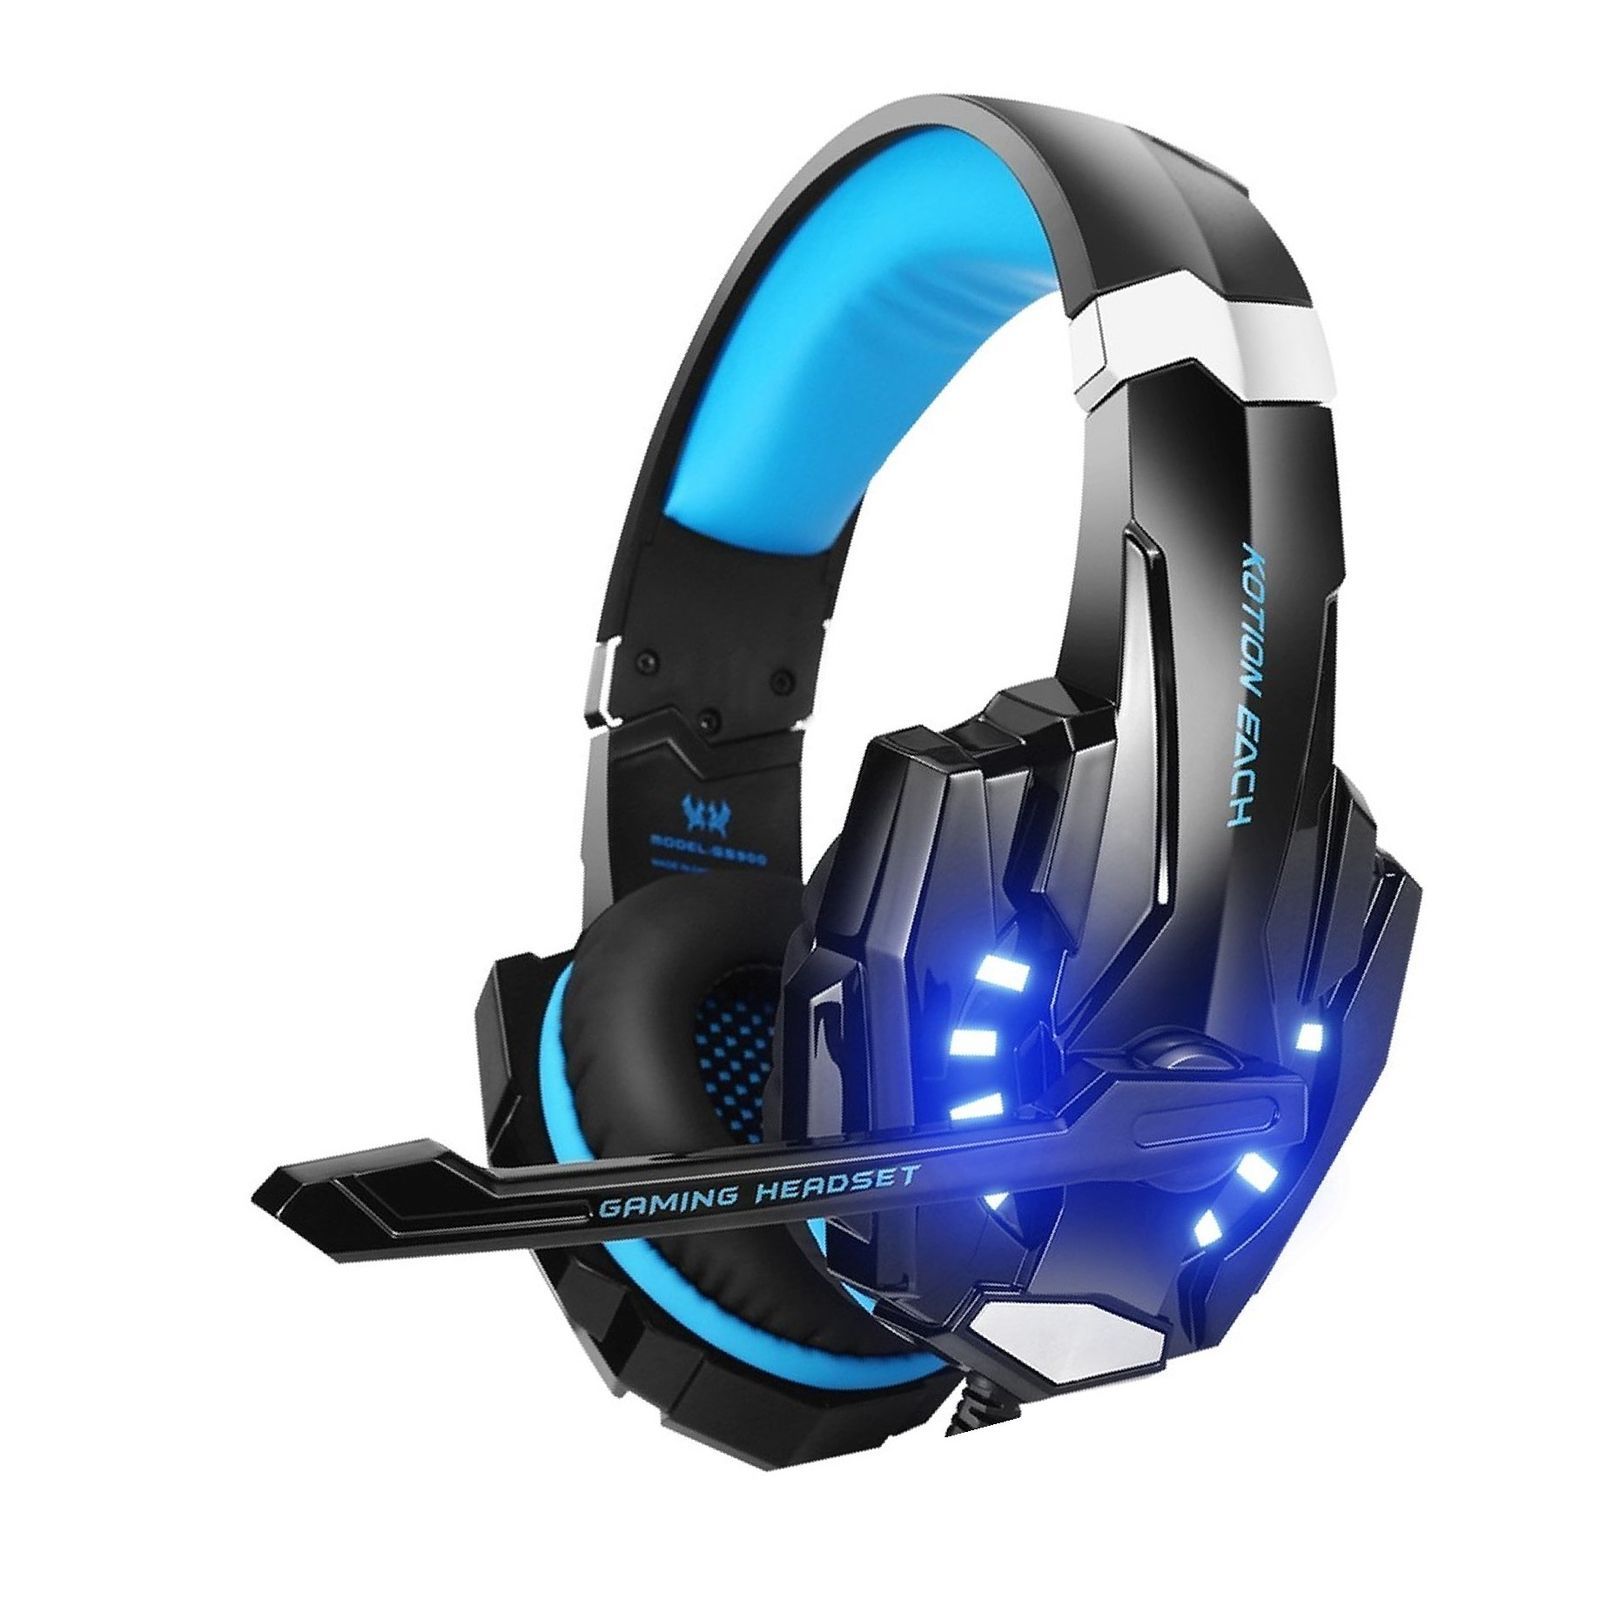 BENGOO G9000 Stereo Gaming Headset for PS4 PC Xbox One Noise Canceling [New] - Headsets